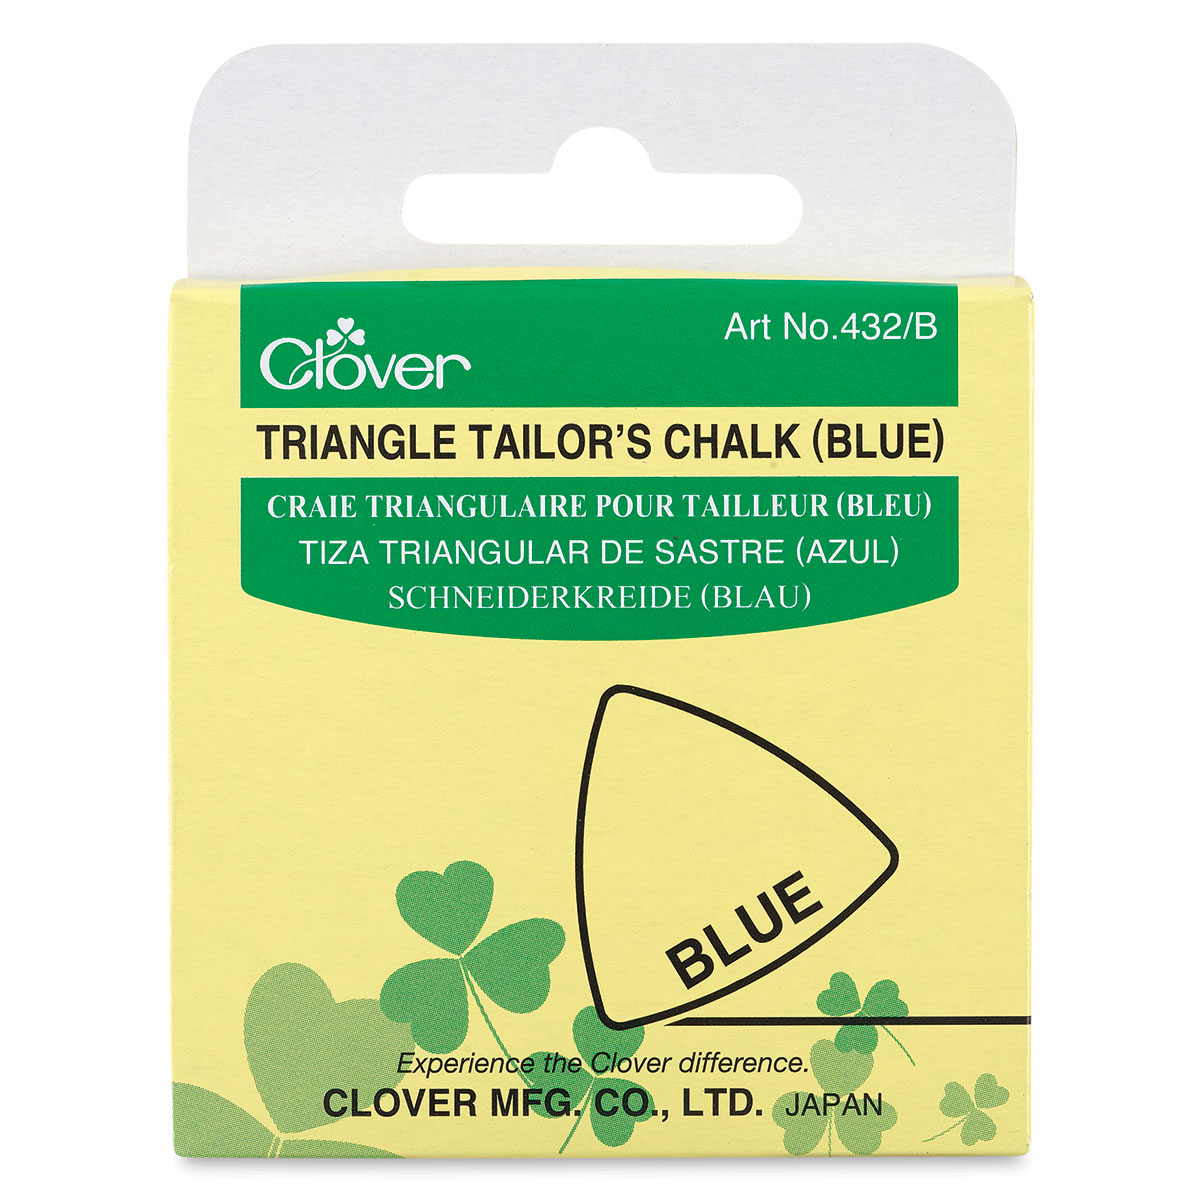 URMI TRADERS Tailors Chalk for Fabric, Fabric Chalk for Sewing